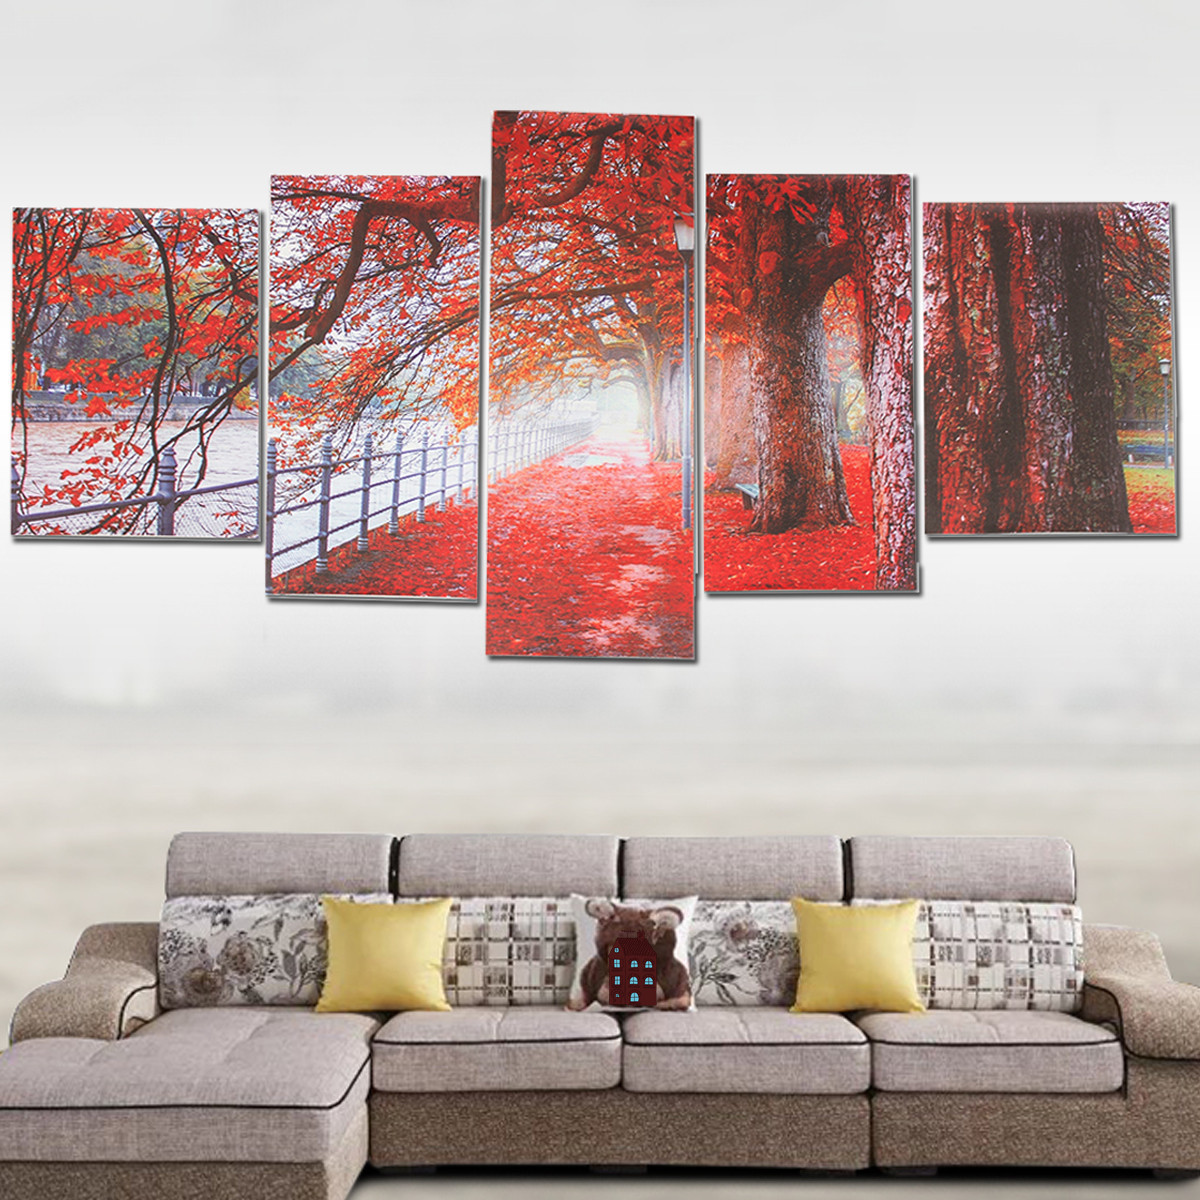 5Pcs-Red-Falling-Leaves-Canvas-Painting-Autumn-Tree-Wall-Decorative-Print-Art-Pictures-Unframed-Wall-1809936-1